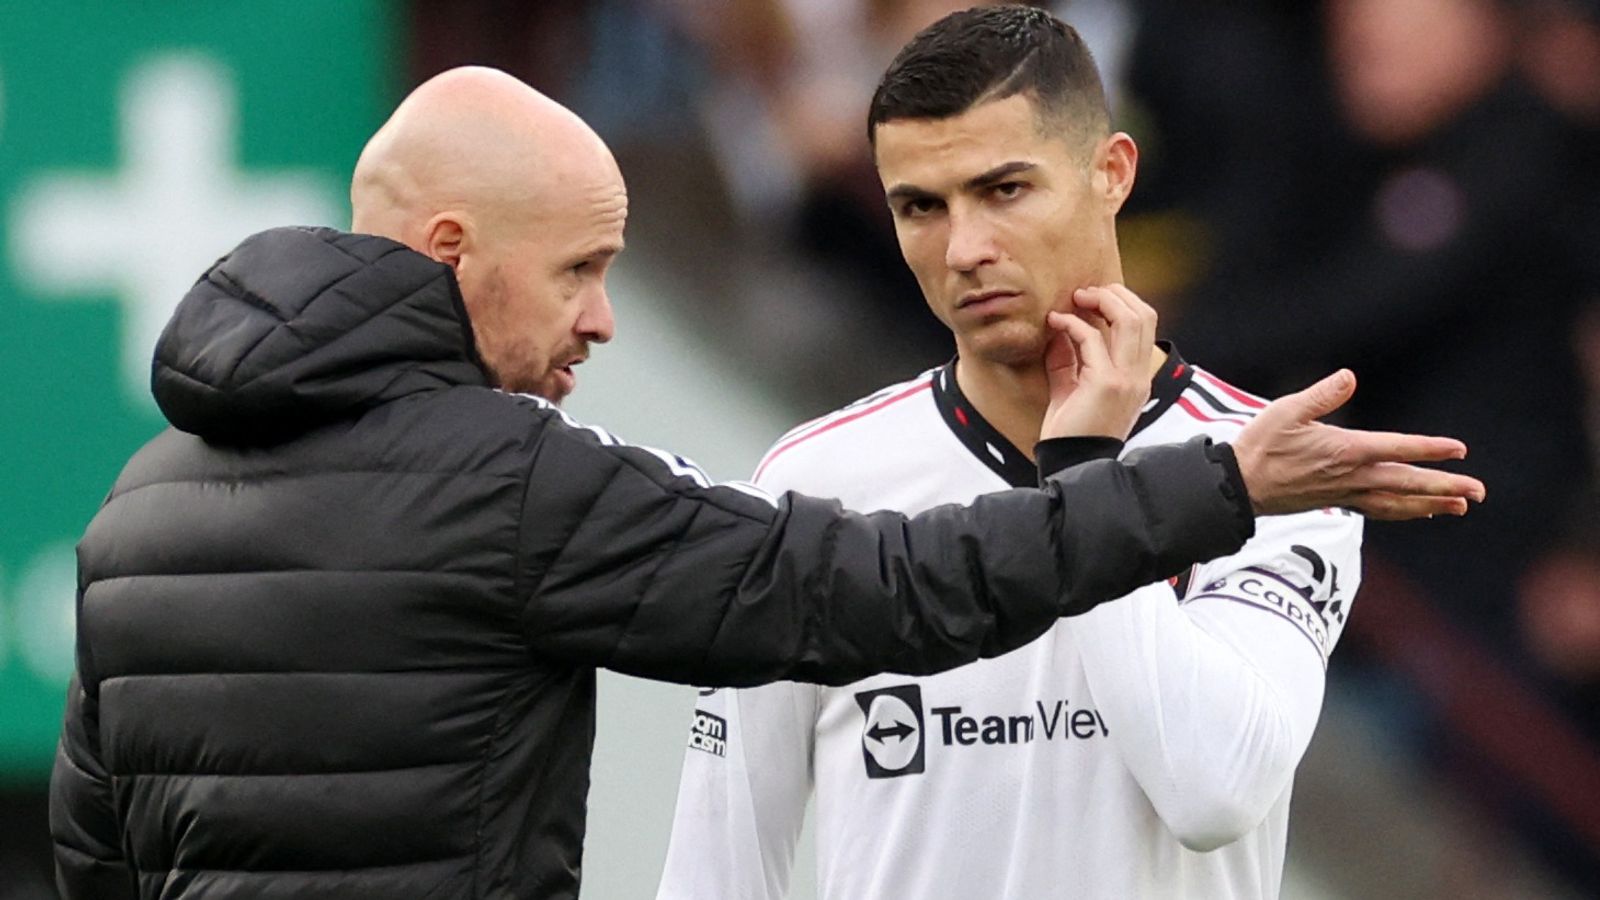 Cristiano Ronaldo says he feels 'betrayed' by Manchester United' and has 'no respect' for Erik ten Hag 